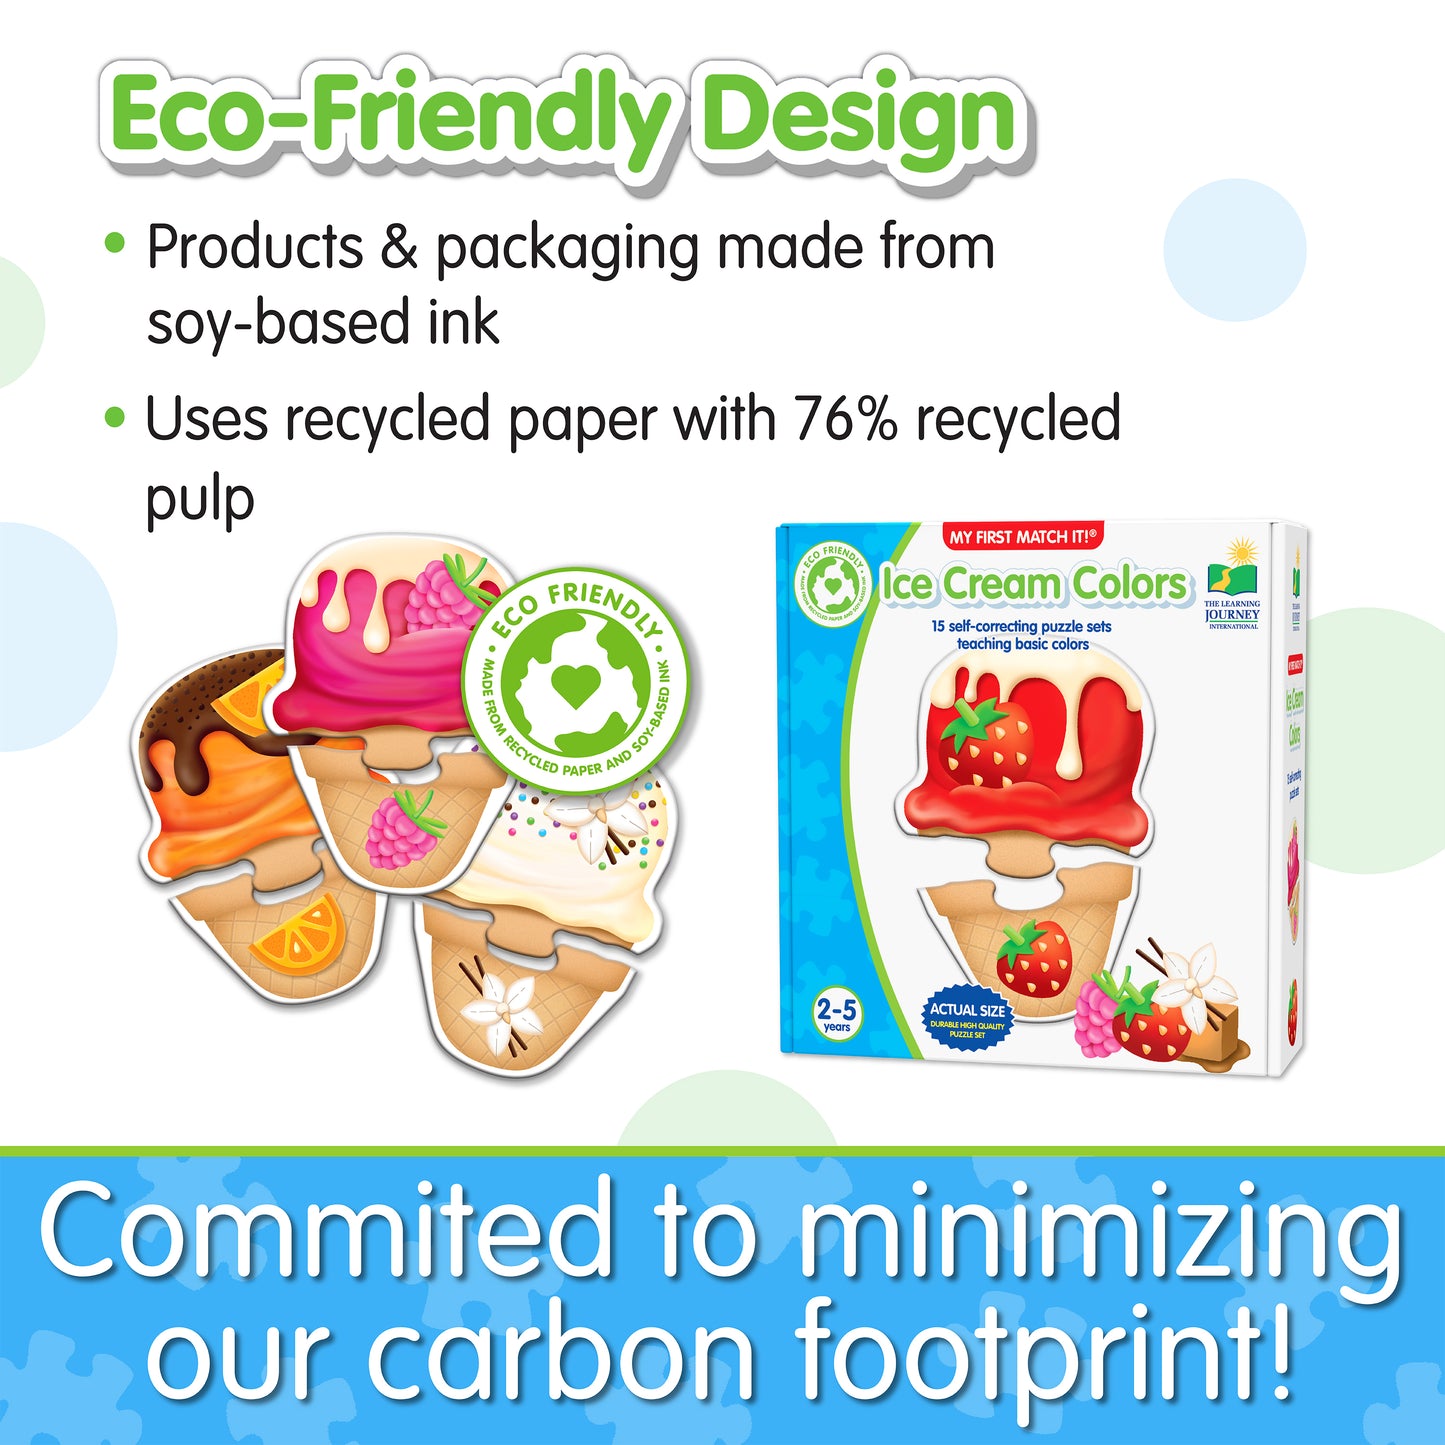 Infographic about My First Match It - Ice Cream Colors' eco-friendly design that says, "Committed to minimizing our carbon footprint!"